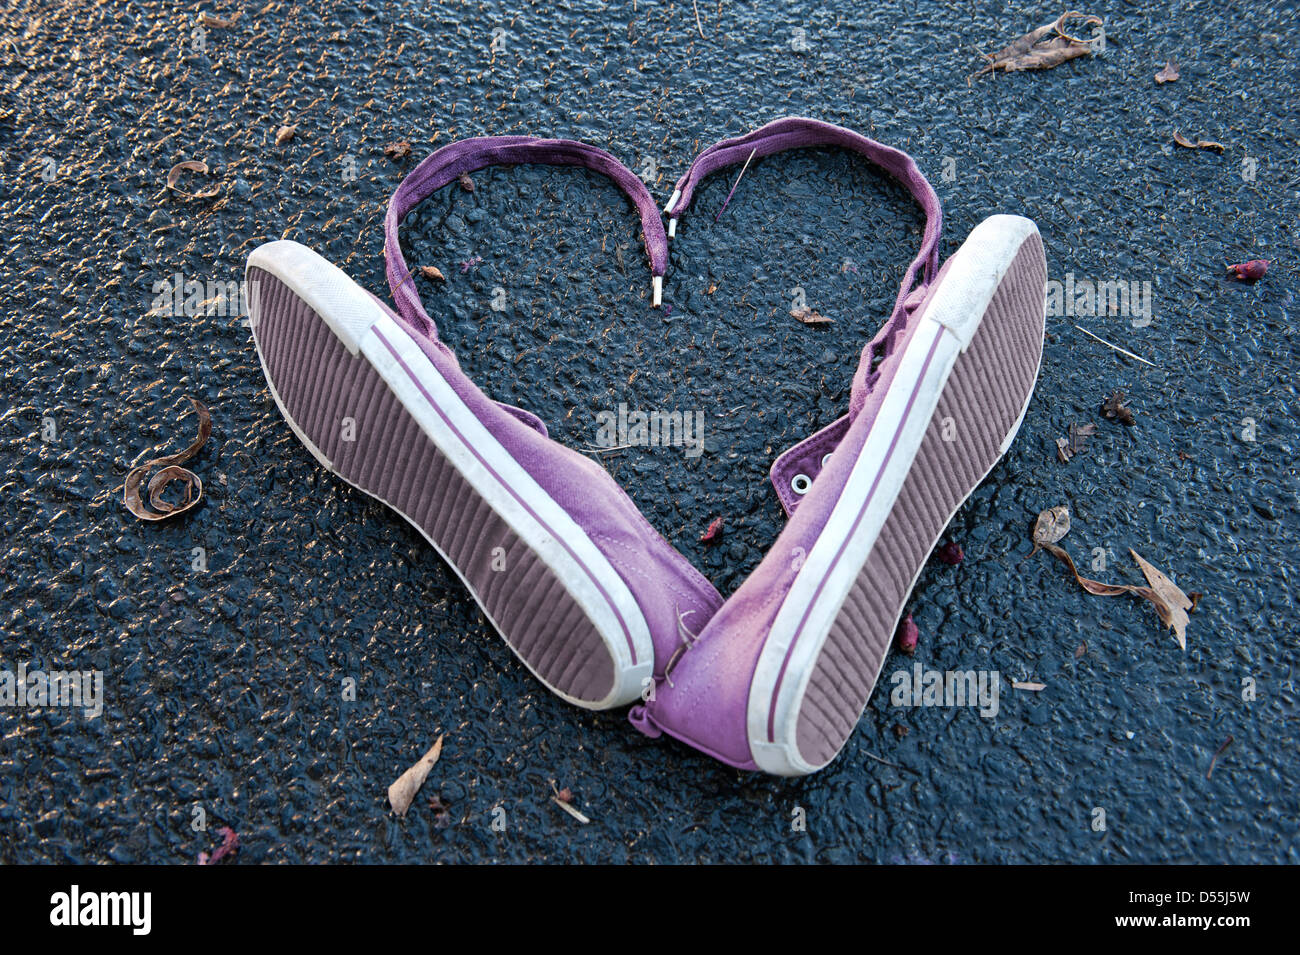 Purple Sneakers arranged in the shape of a heart on a wet tar road with some winter leaves. Stock Photo